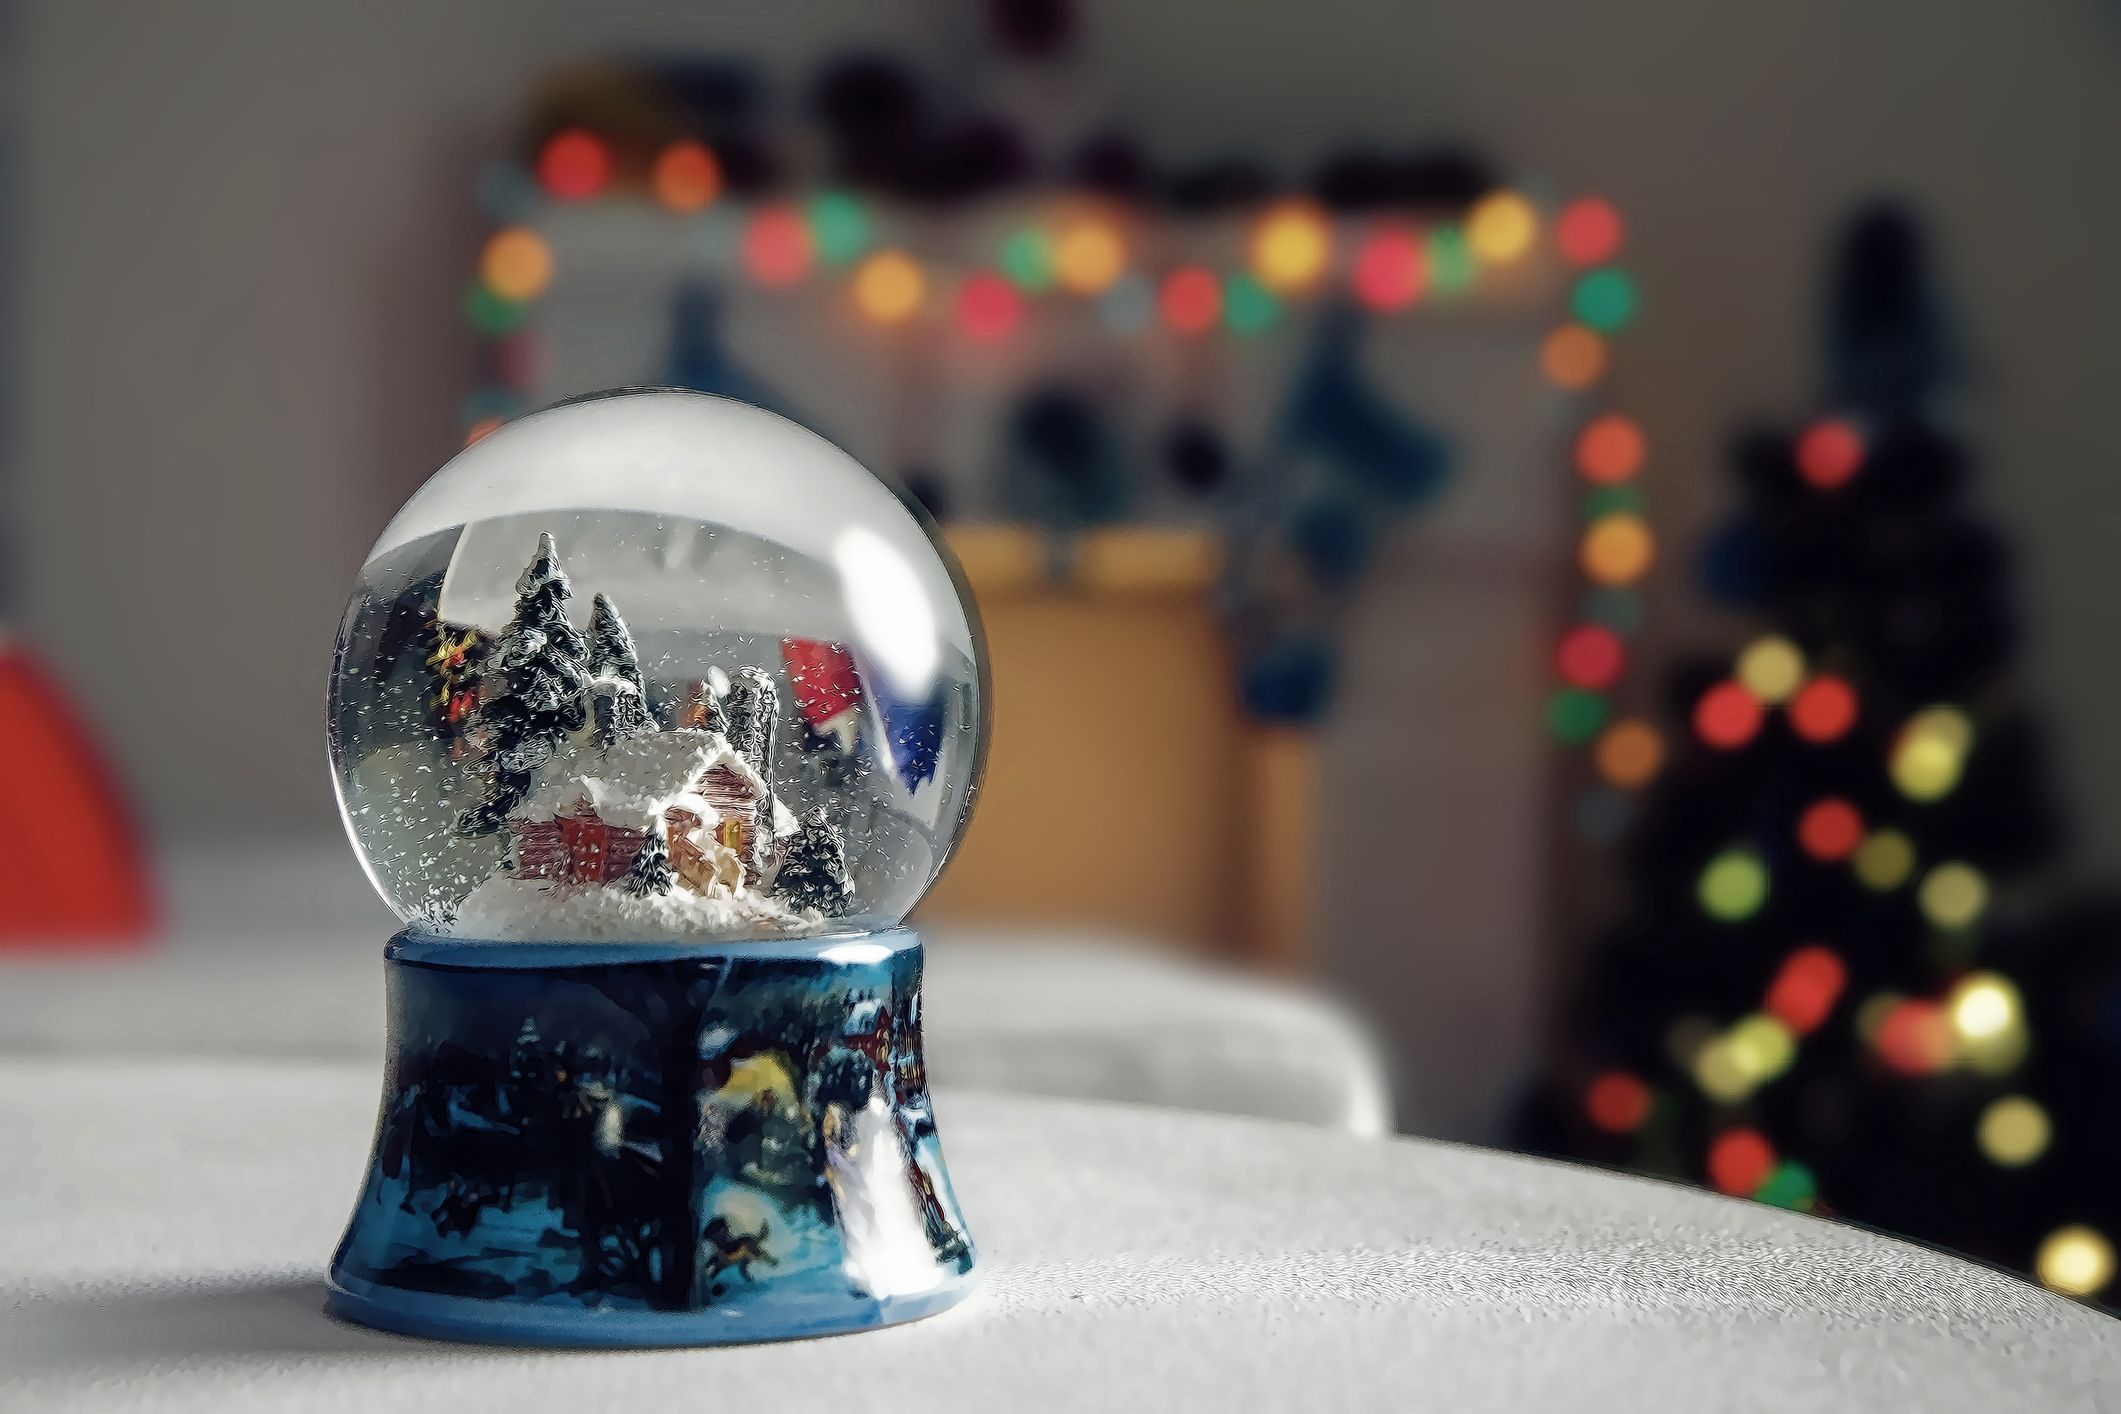 2121x1414 Keep Your Dog Away From Toxic Snow Globes This Christmas, says Vet